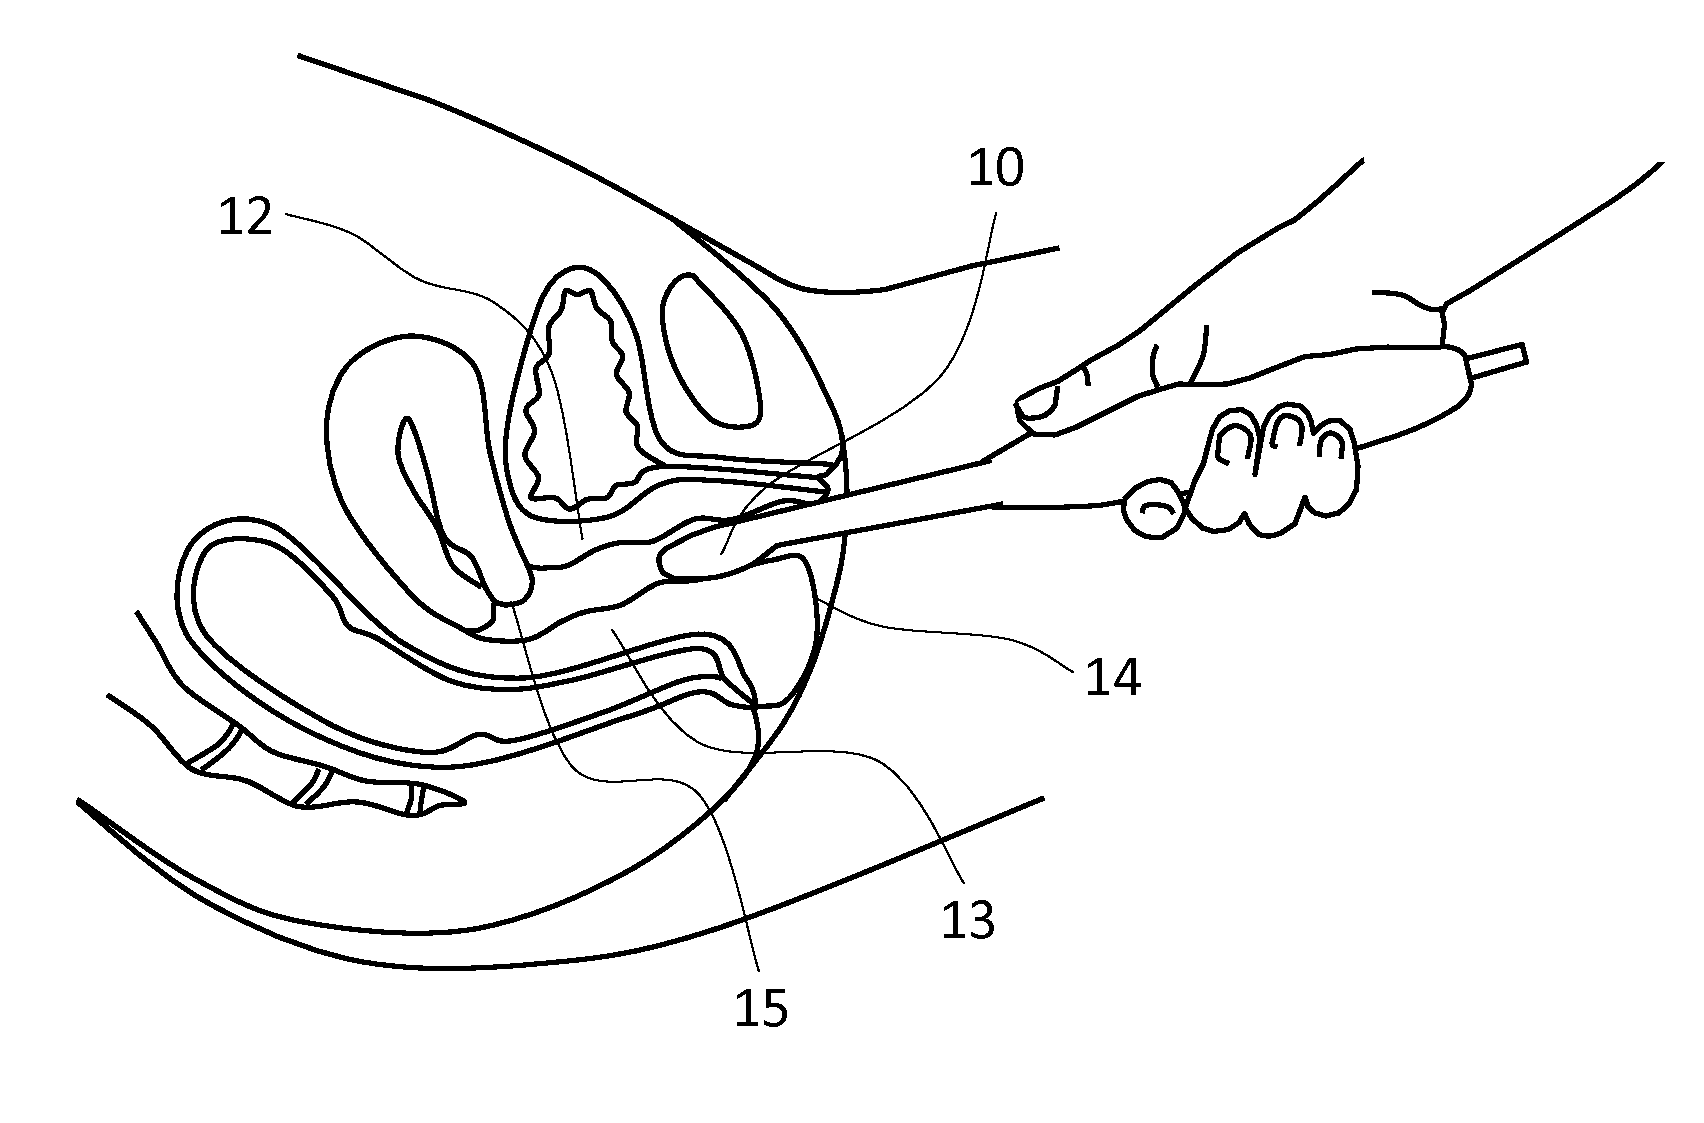 Methods for characterizing vaginal tissue elasticity